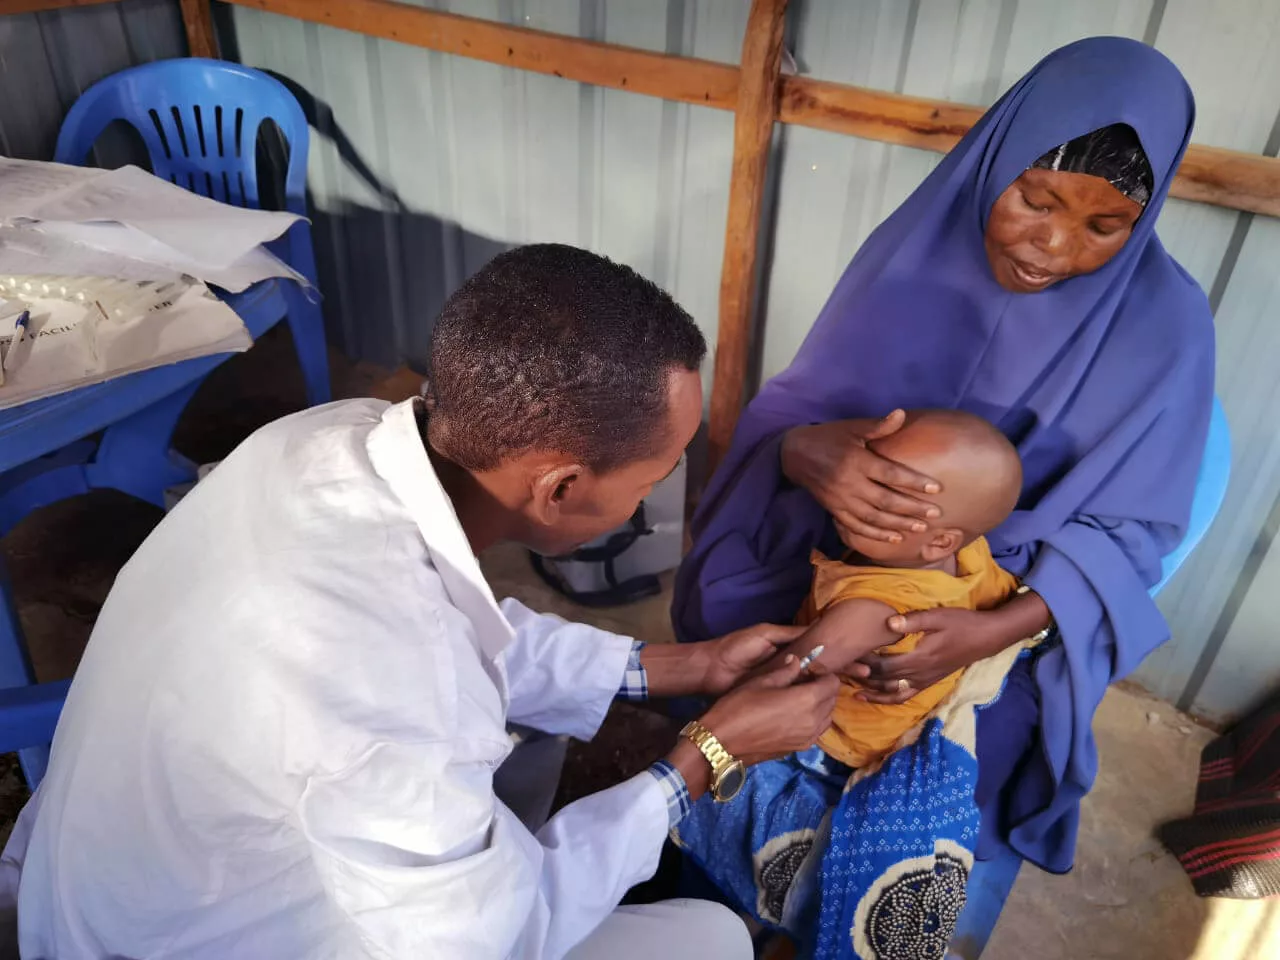 Mu’ad Isak Barre sits in his mother’s lap while receiving a vaccine from an International Medical Corps team member in Somalia.